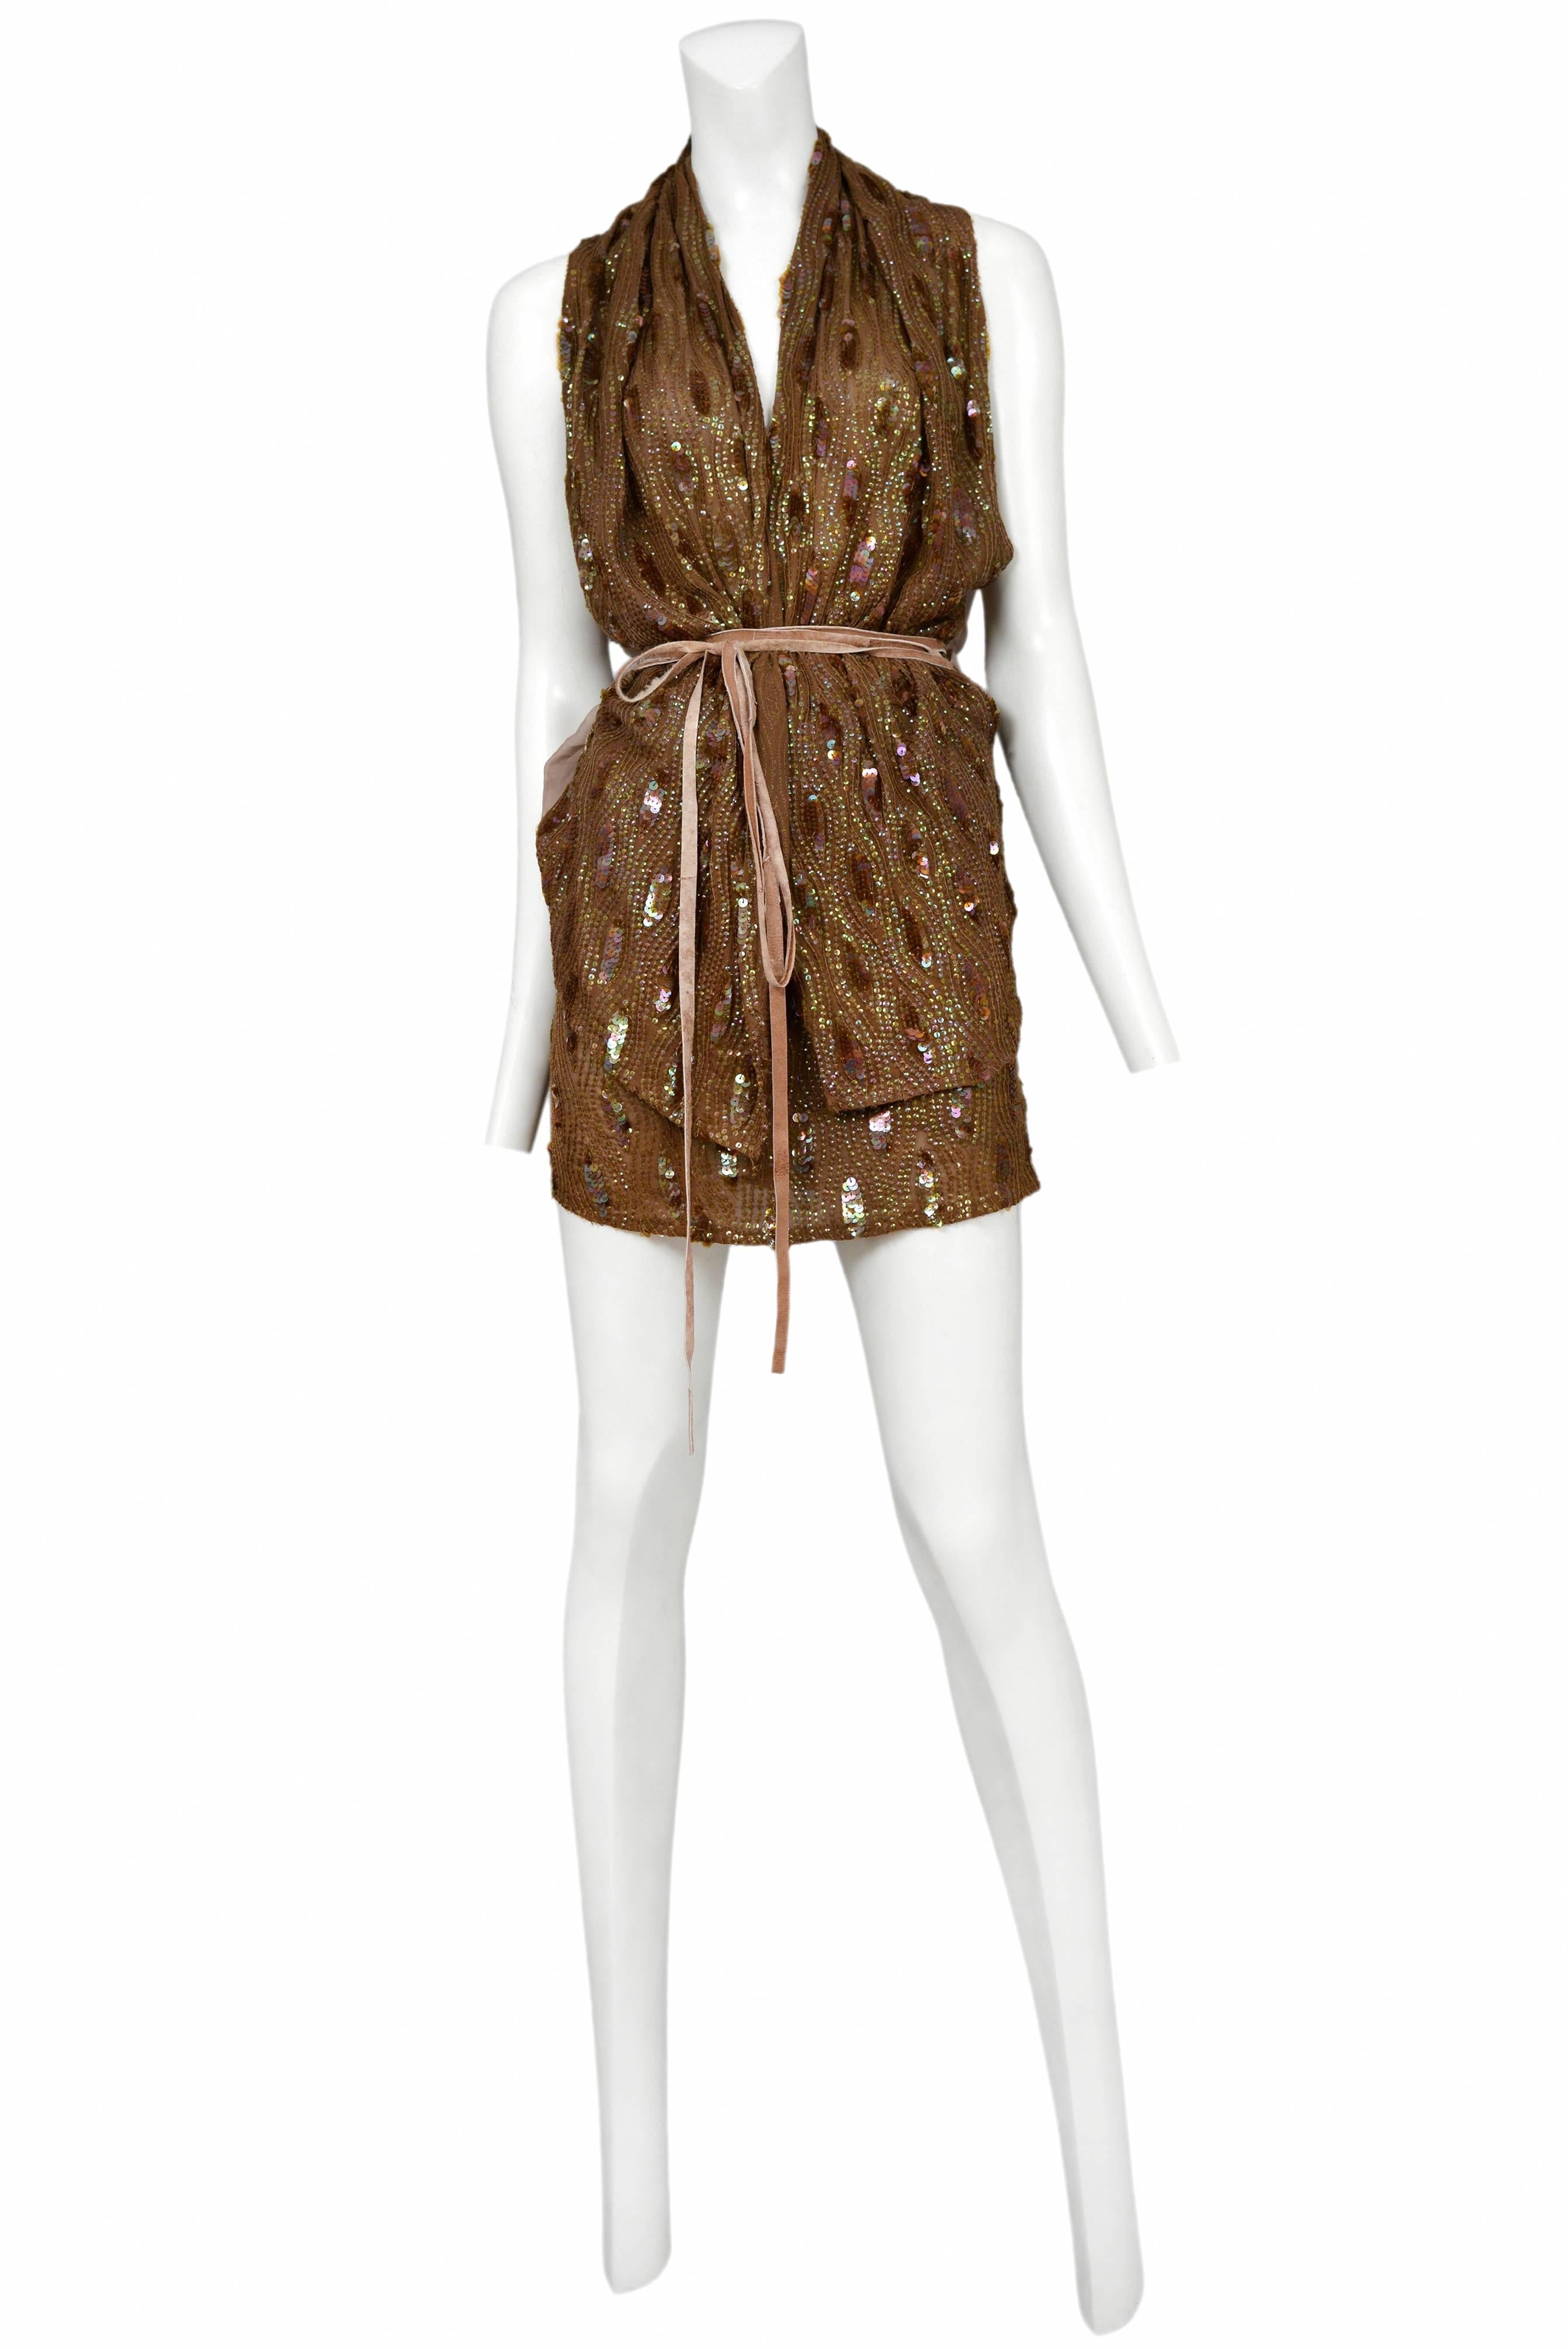 Vintage Ann Demeulemeester ensemble featuring a brown sequin adorned wrap top with sheer brown chiffon at the back and stays in place with a brown suede tie and matching mini skirt.
Please inquire for additional images.